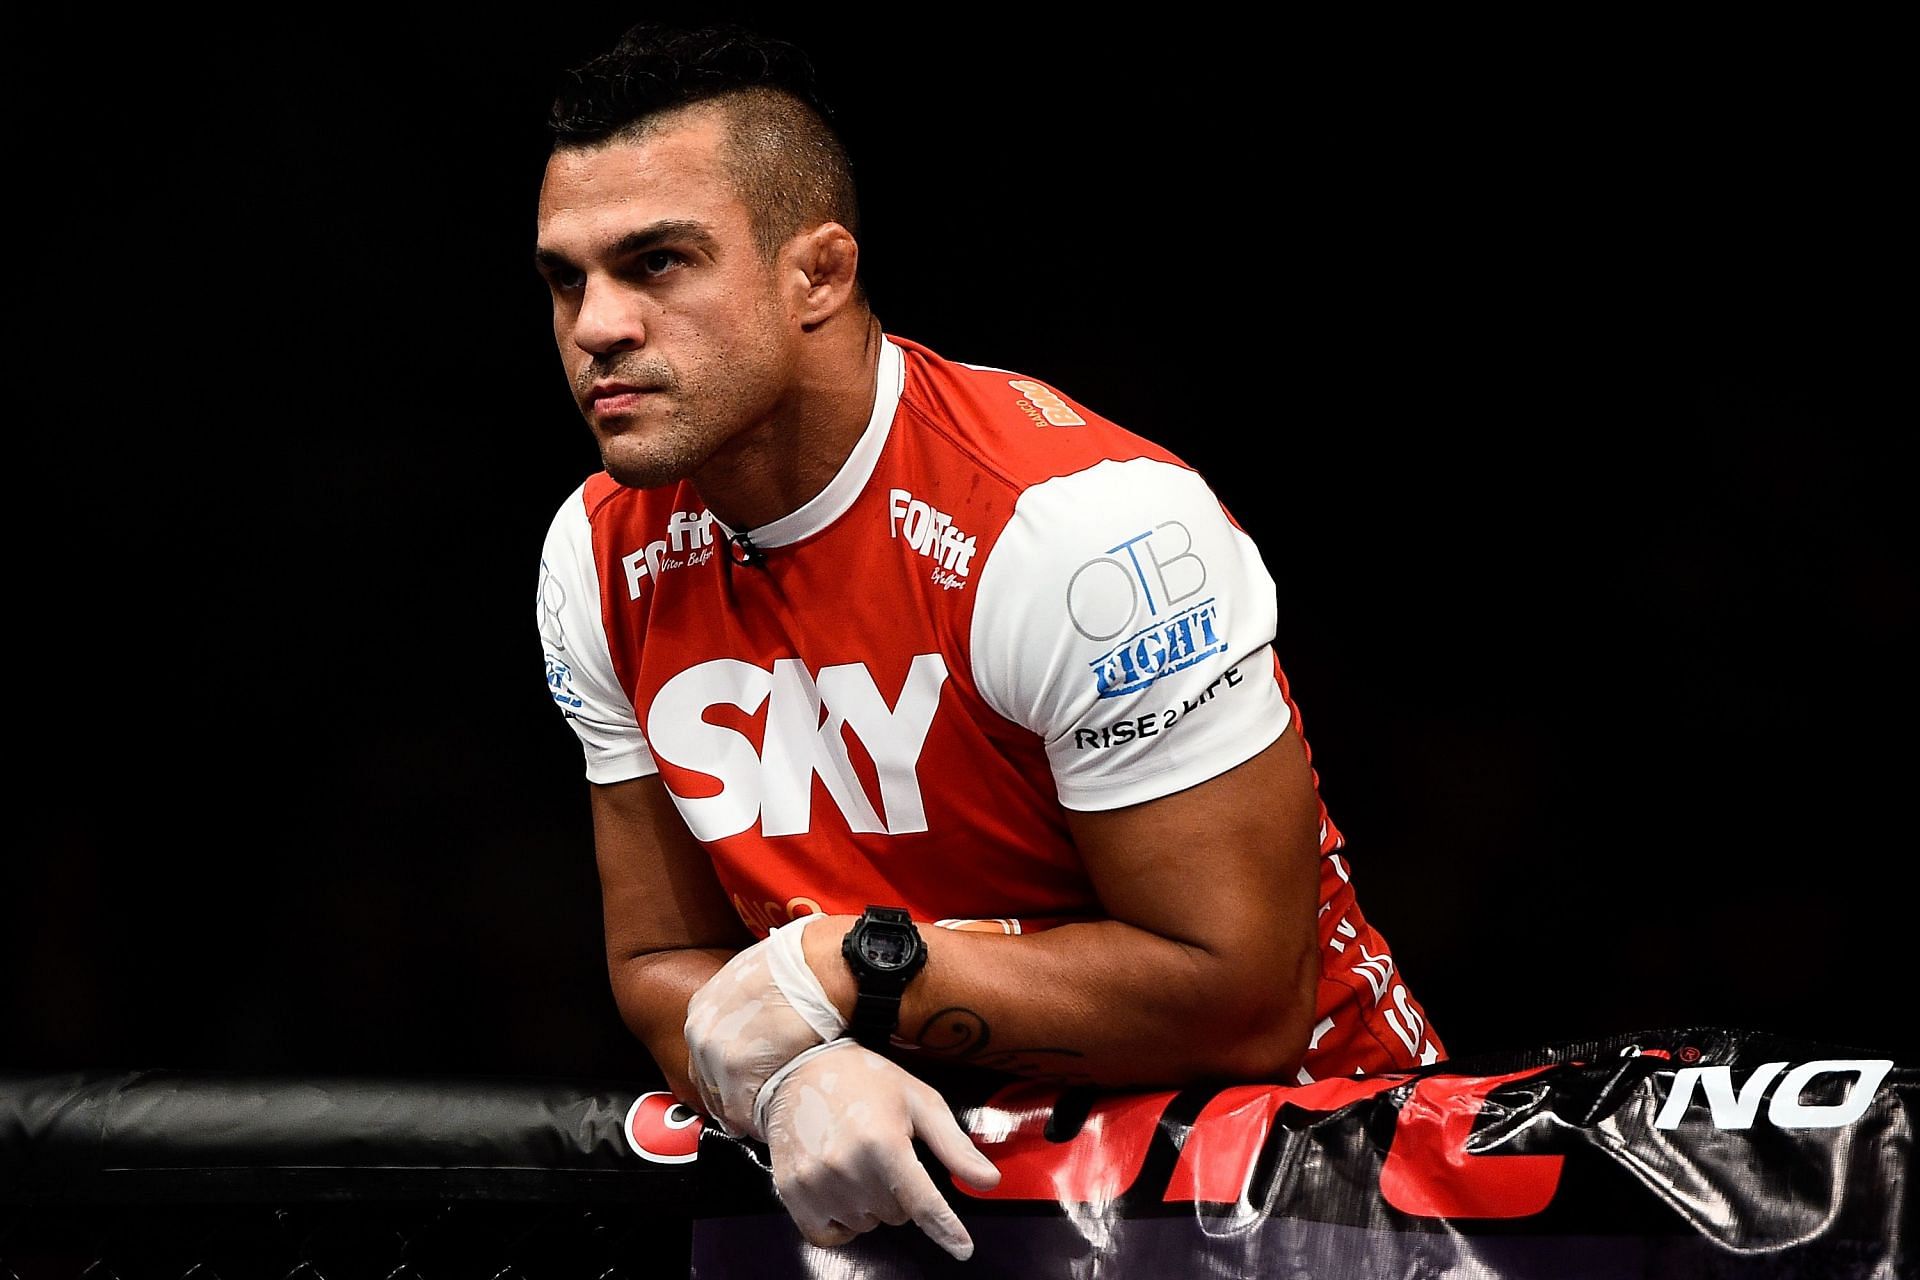 Vitor Belfort was knocking foes out in the octagon for nearly two decades